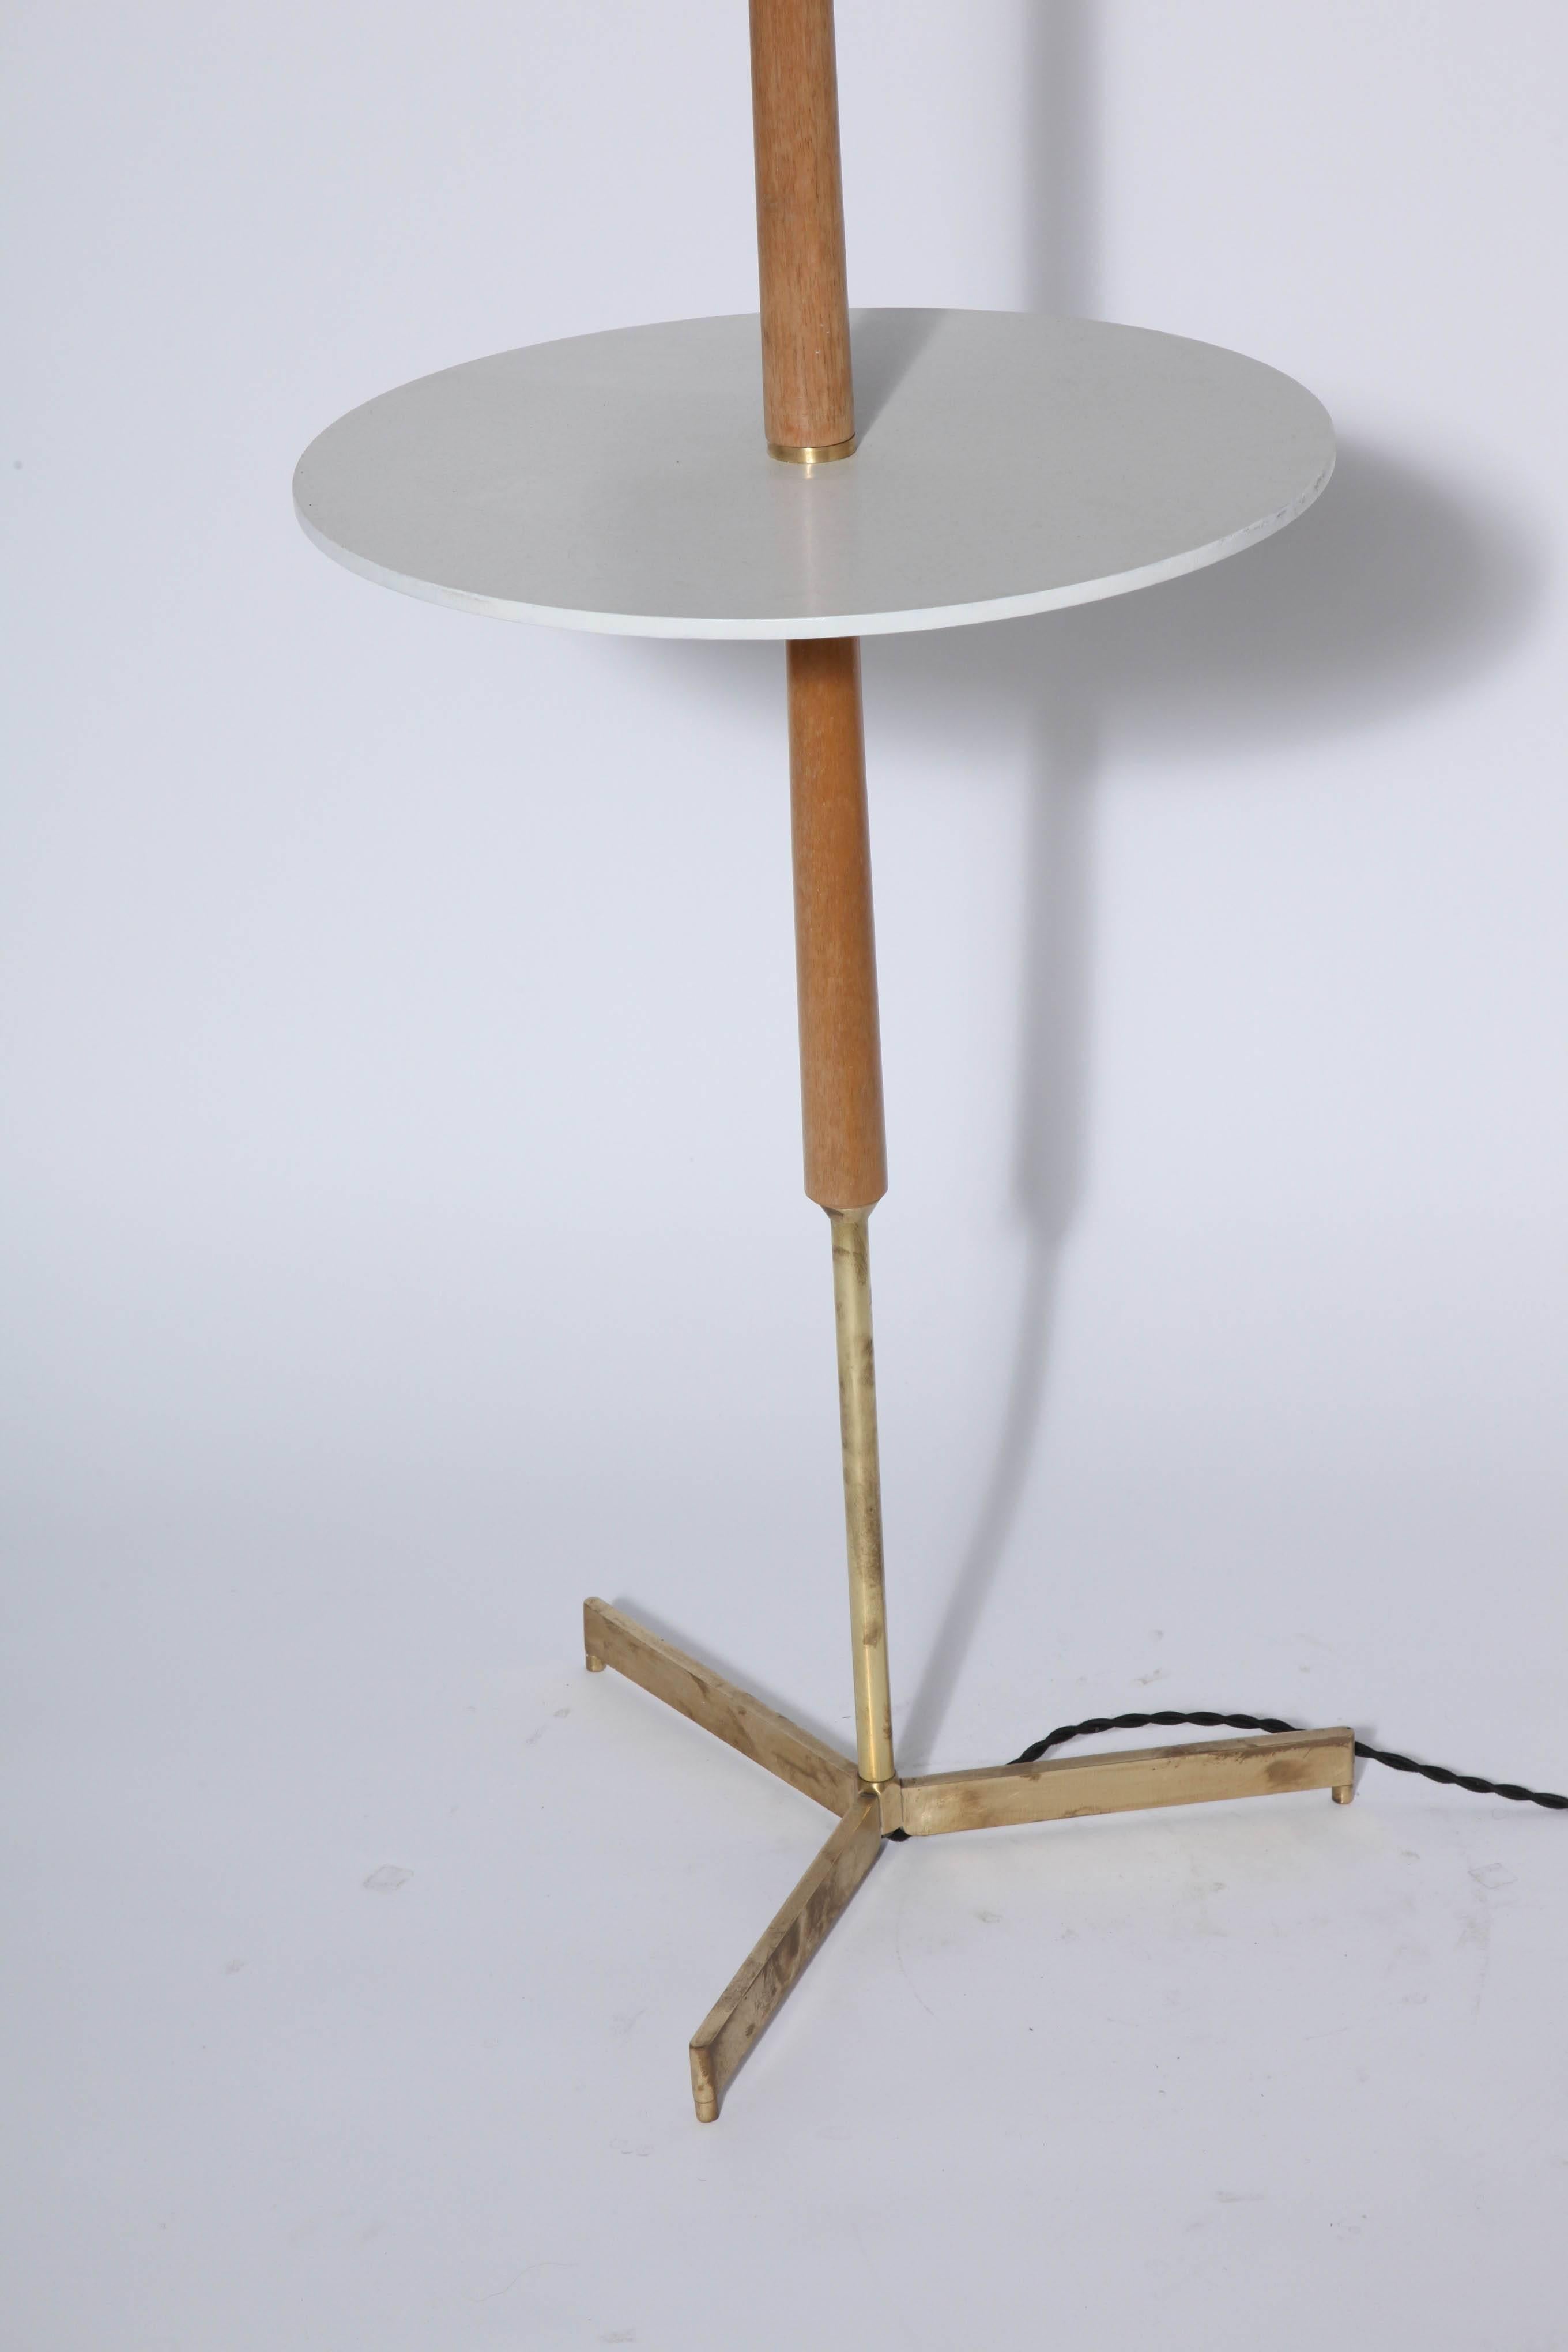 Mid-Century Modern McCobb Style Bleached Mahogany, Micarta & Brass Side Table Floor Lamp, 1950's For Sale